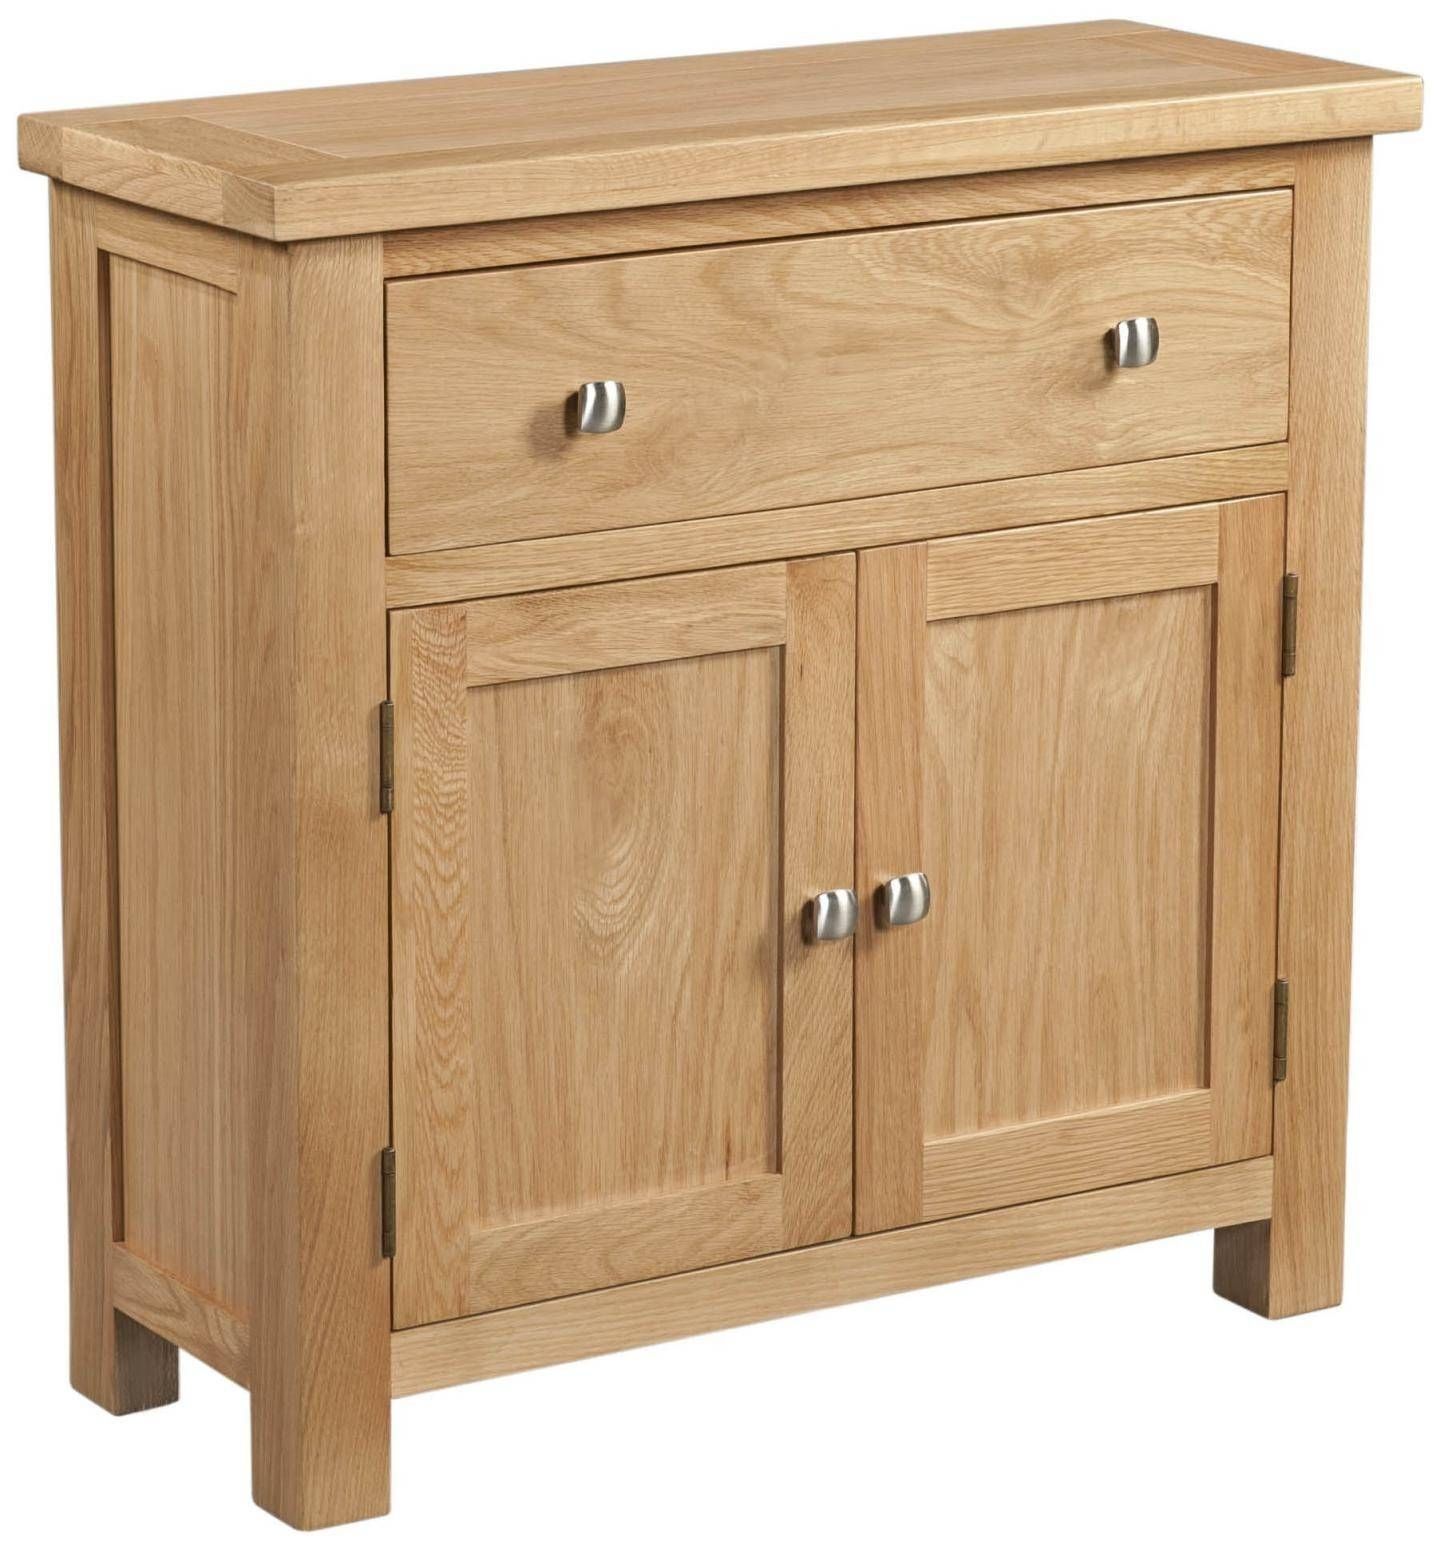 Lovely Pine & Oak Sideboards | Willoby's Furniture Swindon, Wiltshire With Oak Sideboards For Sale (Photo 8 of 15)